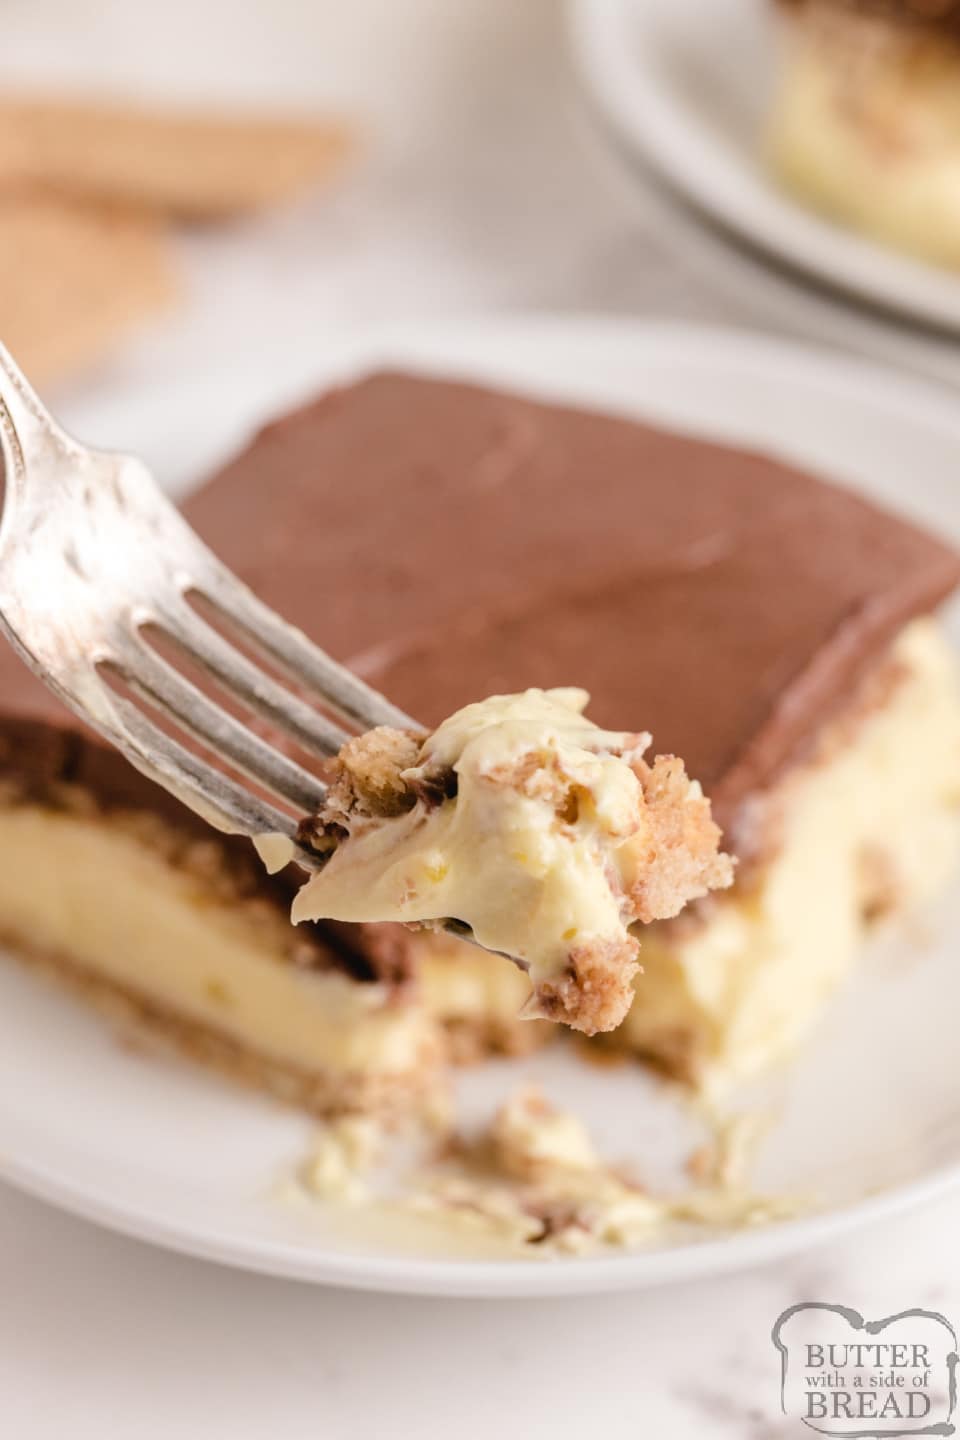 No Bake Eclair Cake made with graham crackers, vanilla pudding and a delicious fudgy chocolate frosting layer on top. This no bake chocolate eclair dessert tastes just like a cream puff!